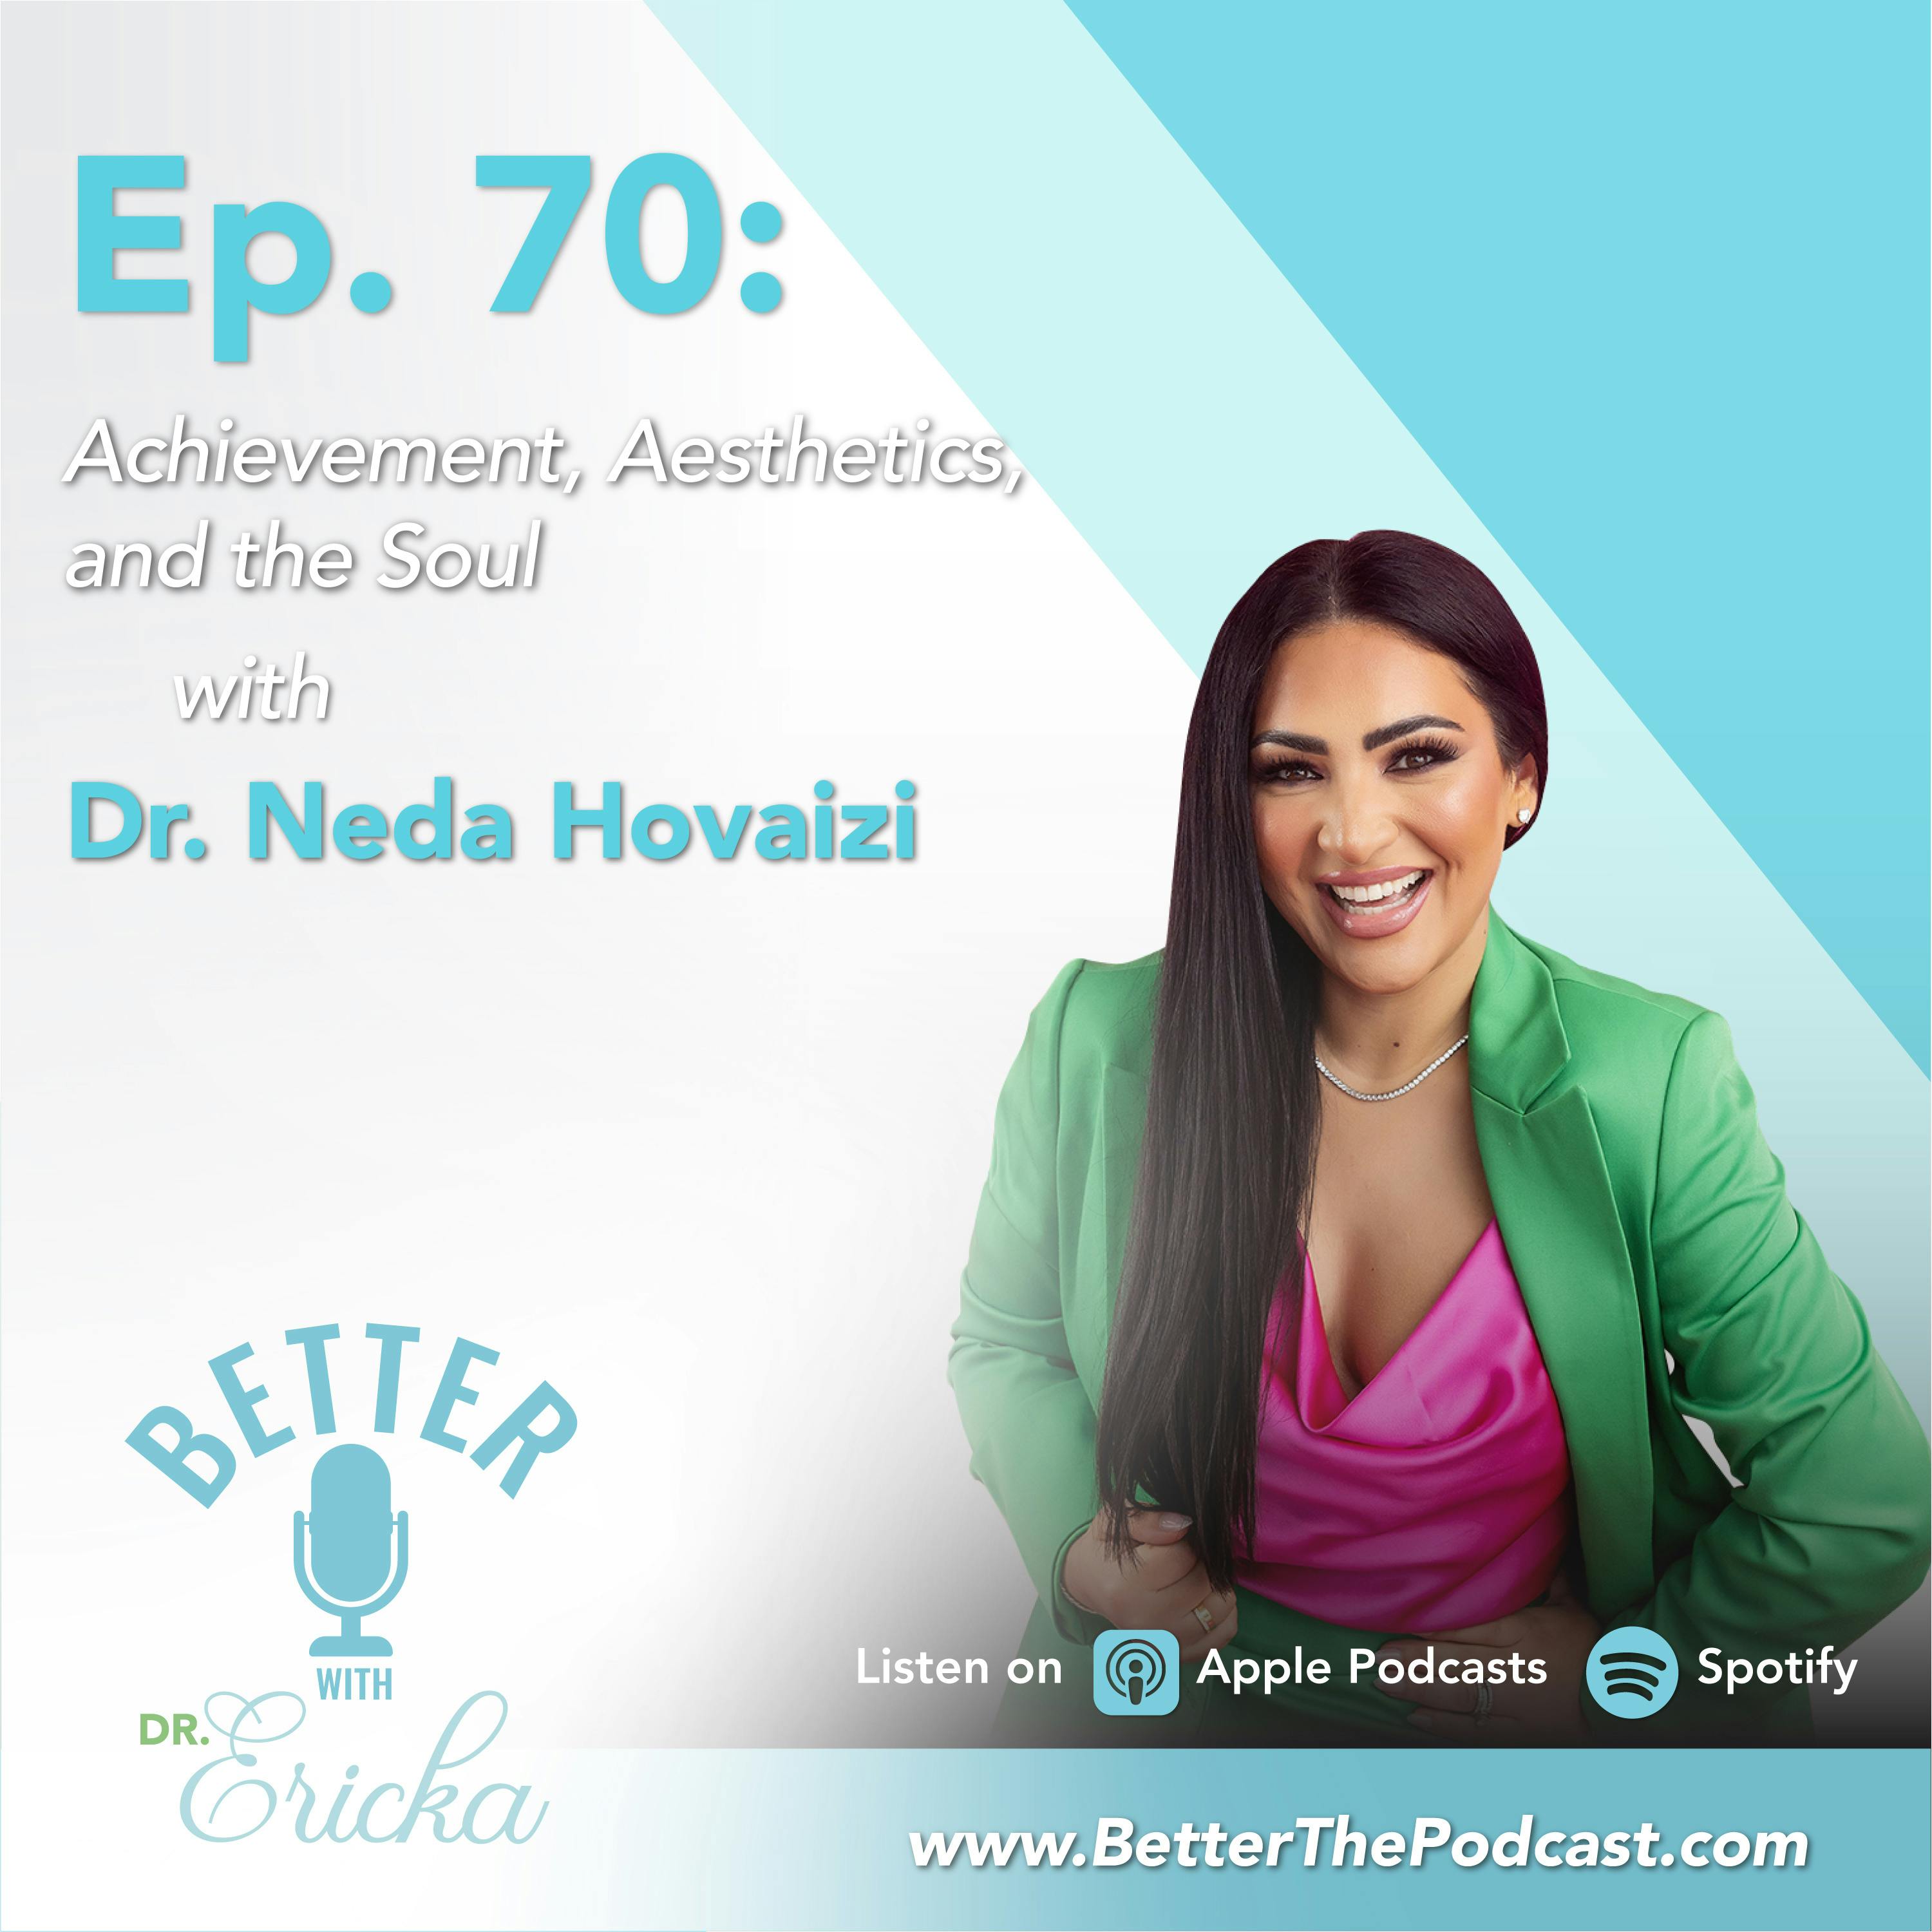 Achievement, Aesthetics, and the Soul with Dr. Neda Hovaizi